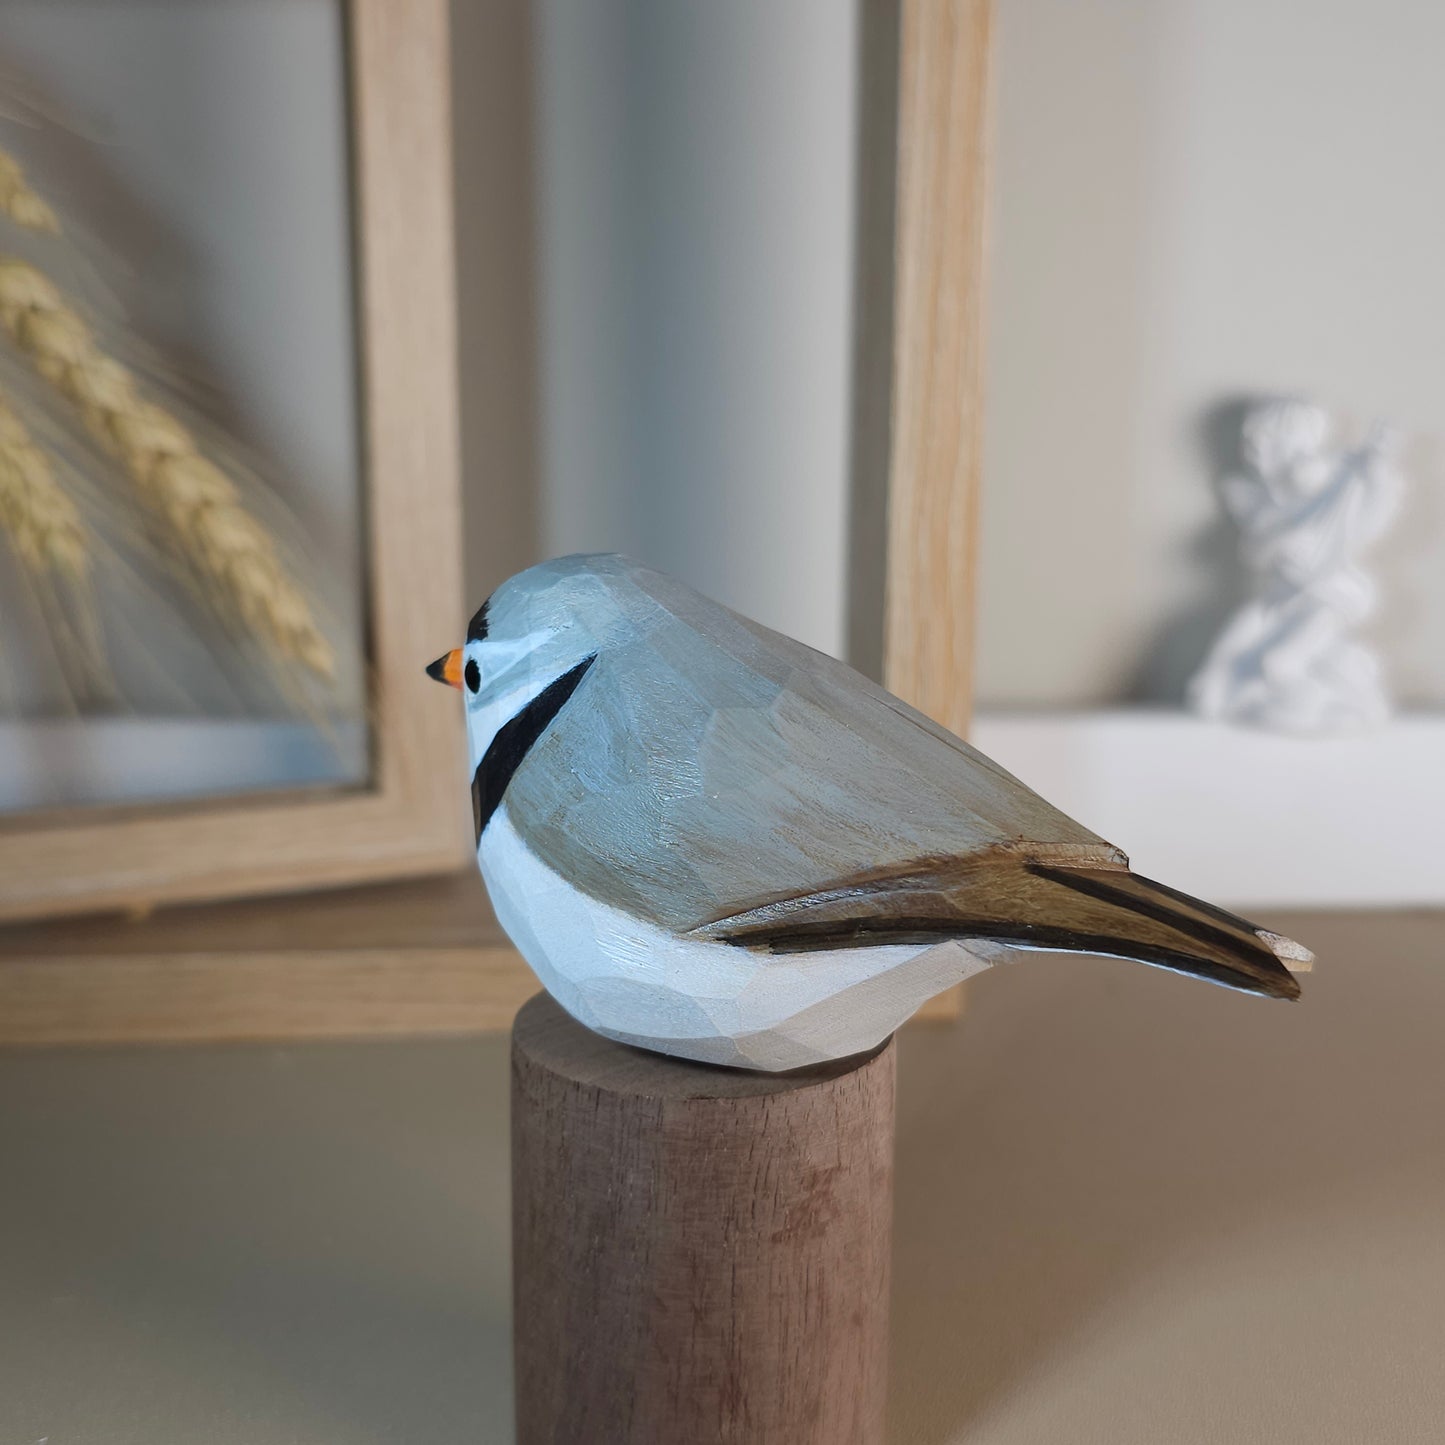 Piping Plover Bird Figurines